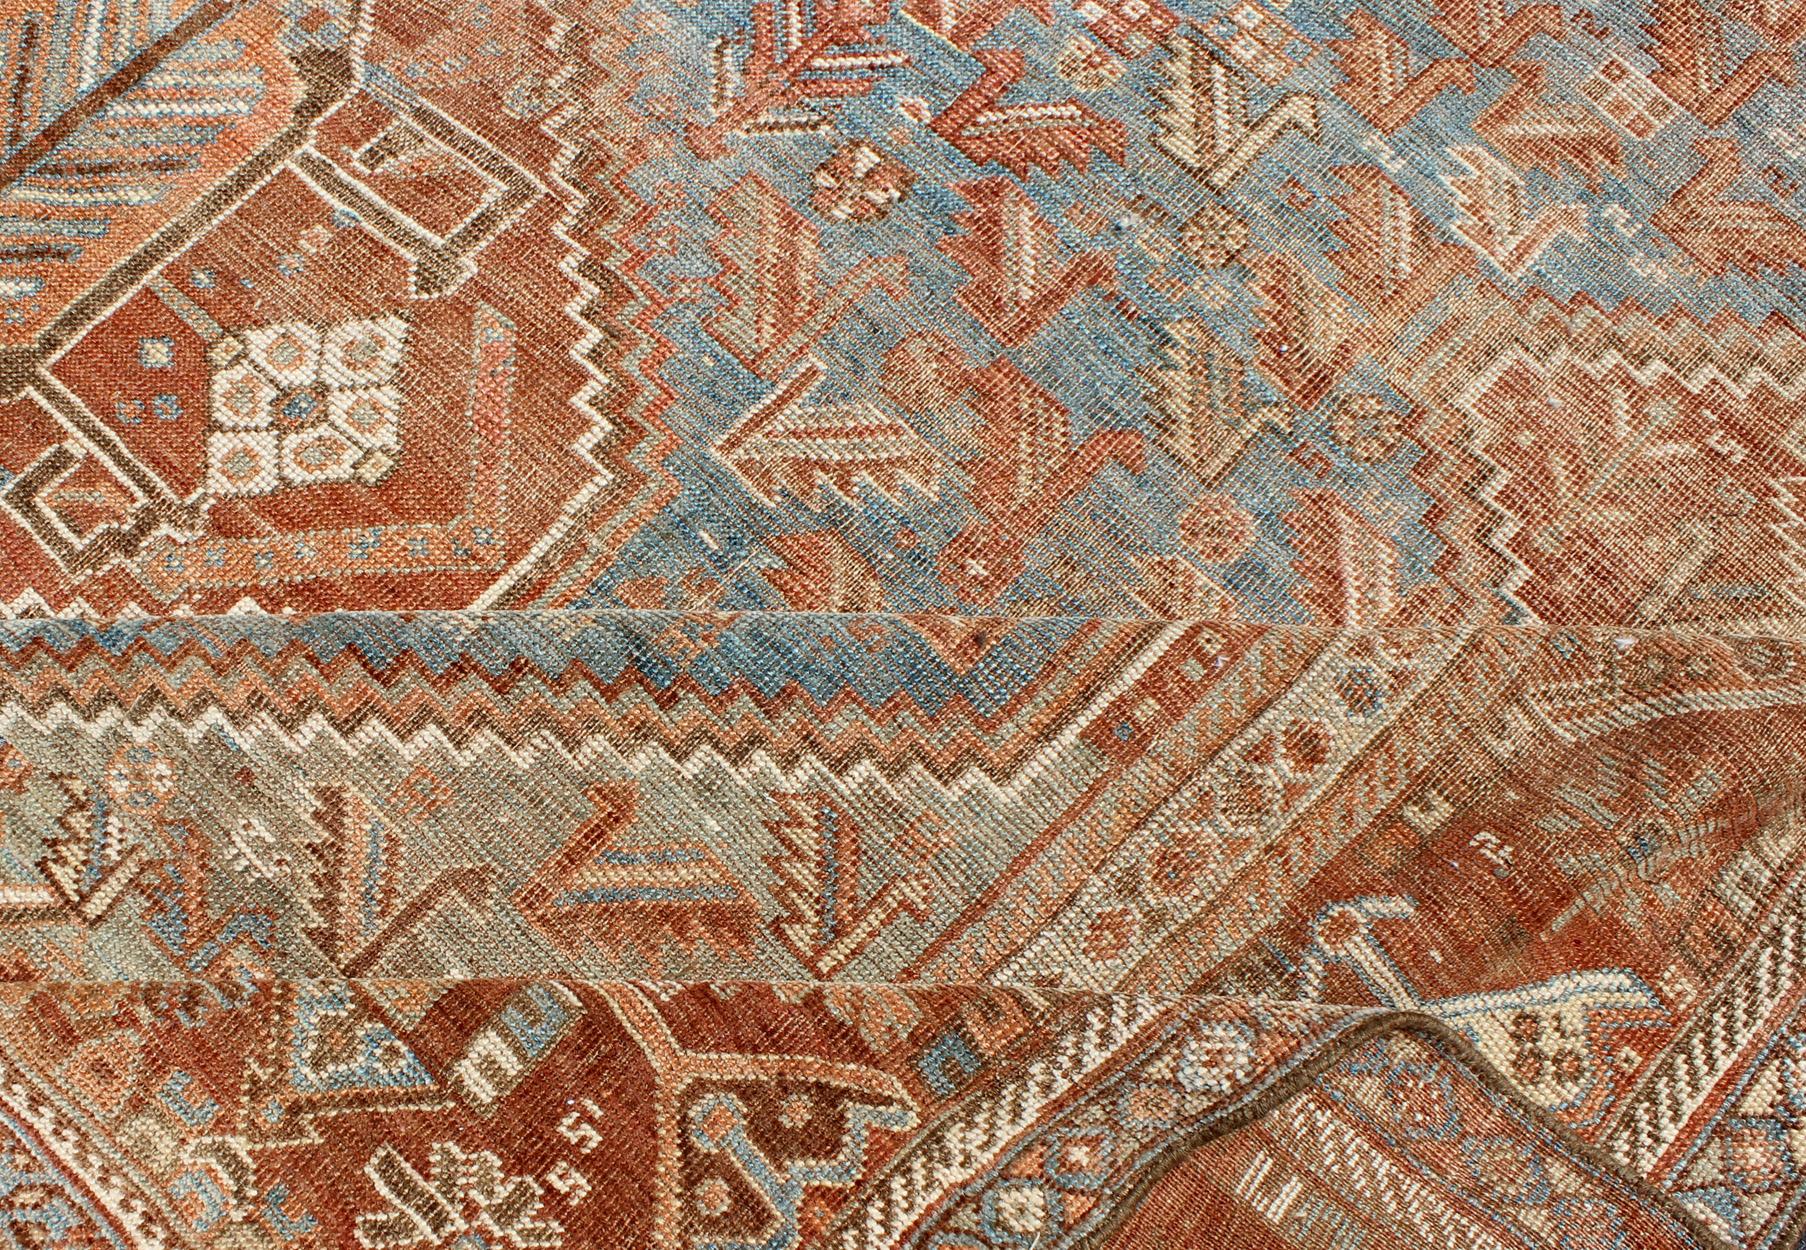 Geometric Vintage Persian Shiraz Rug with Tri-Medallion Design in Shades of Red In Excellent Condition For Sale In Atlanta, GA